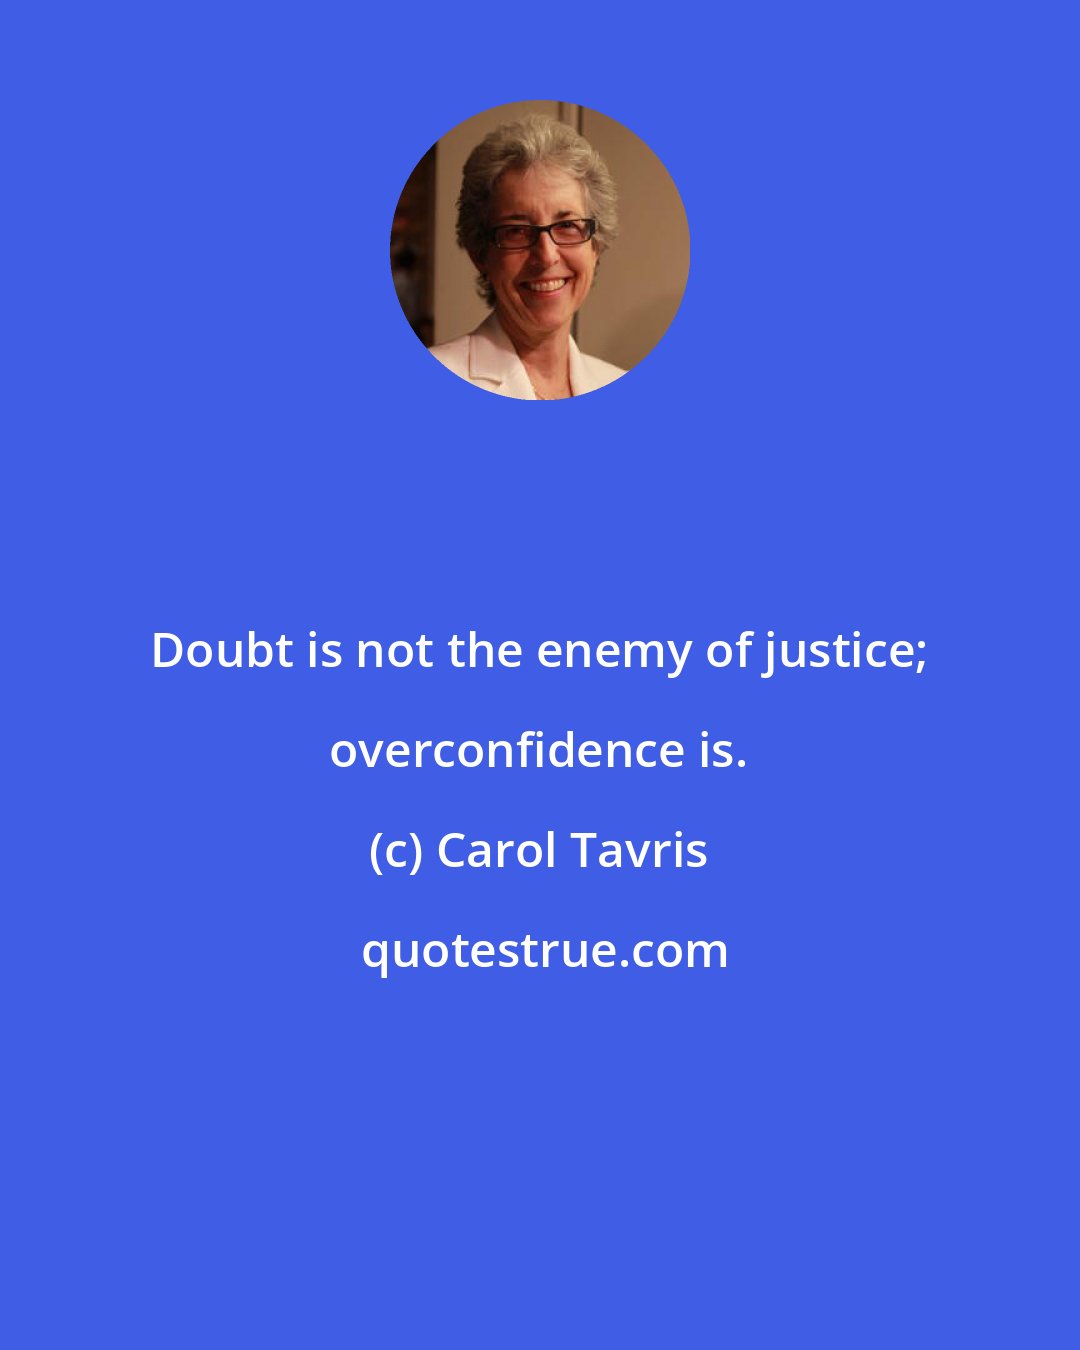 Carol Tavris: Doubt is not the enemy of justice; overconfidence is.